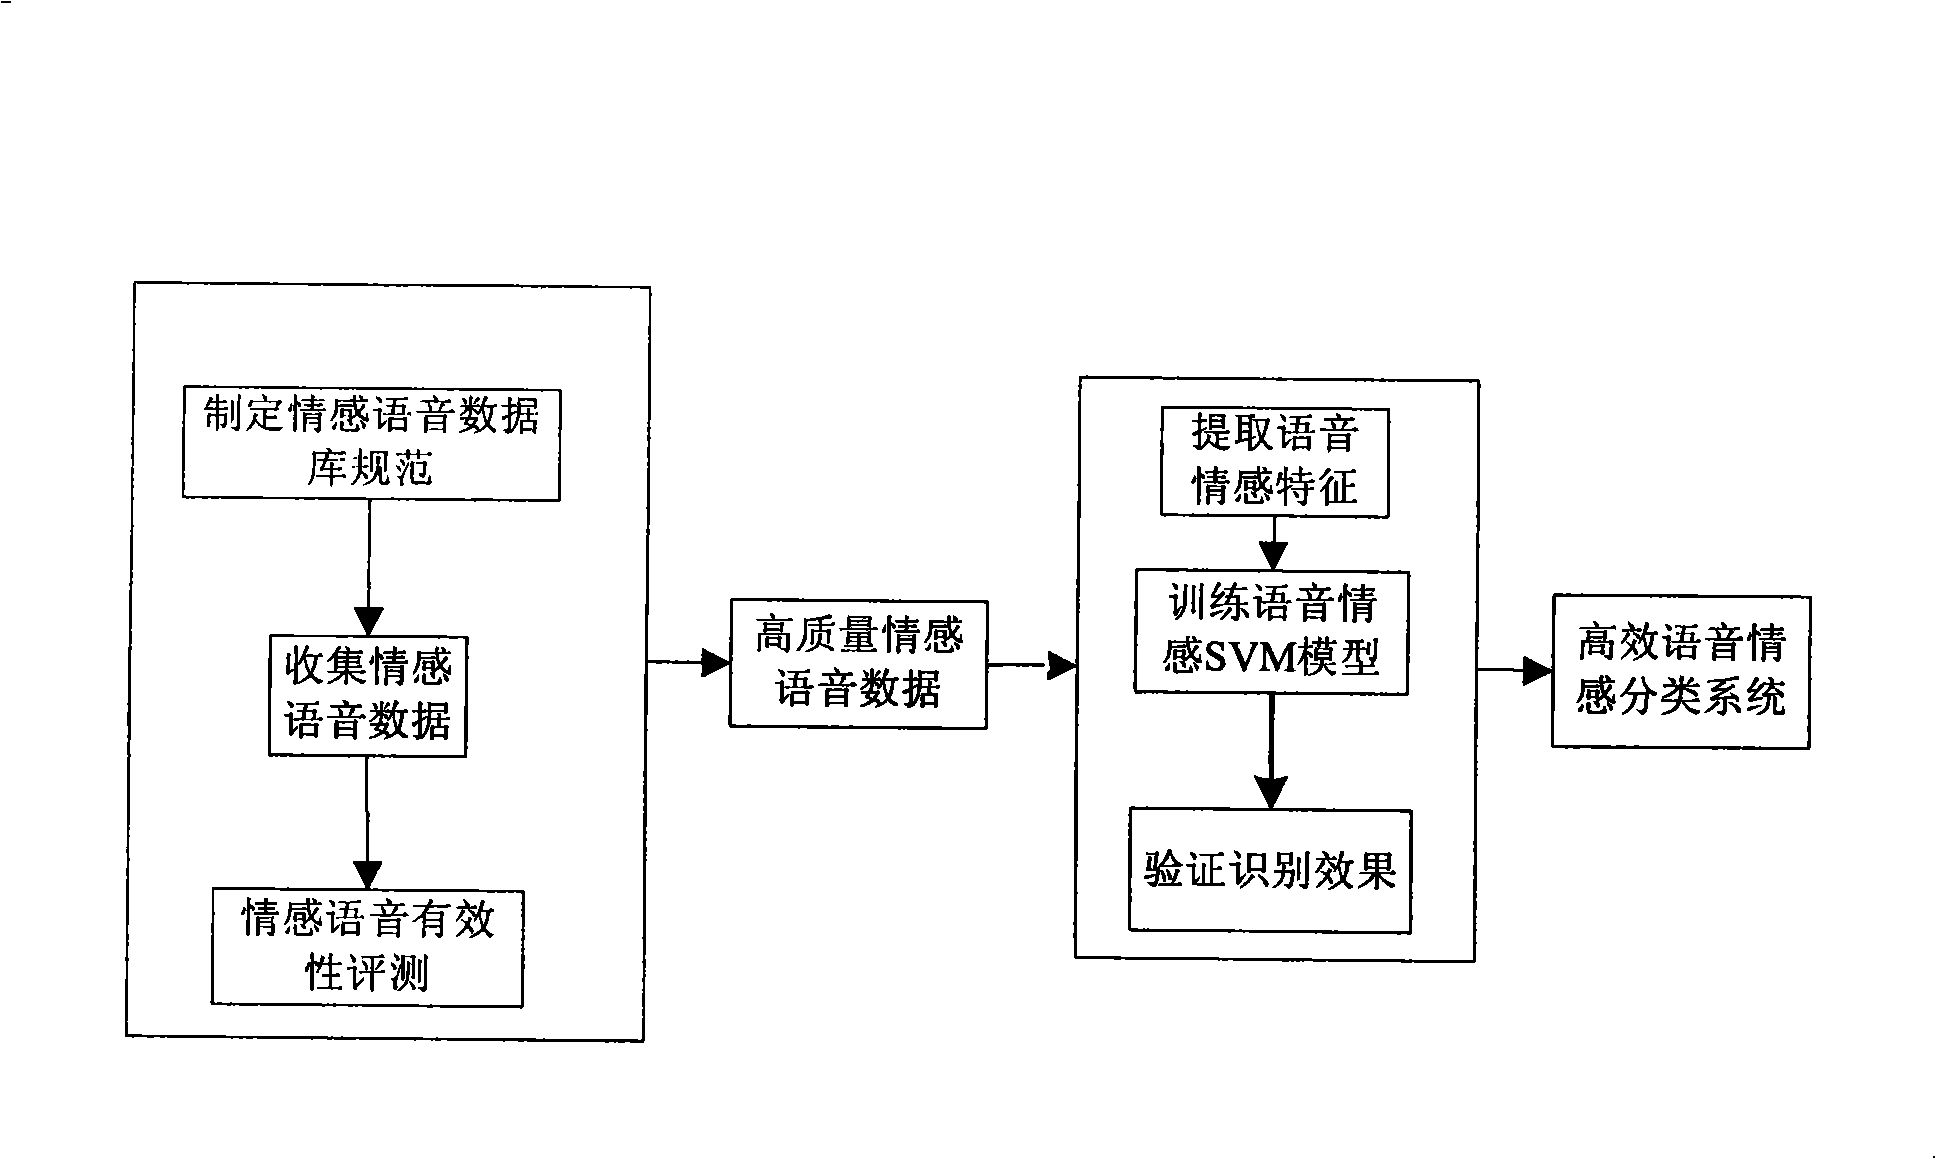 Extraction and modeling method for Chinese speech sensibility information